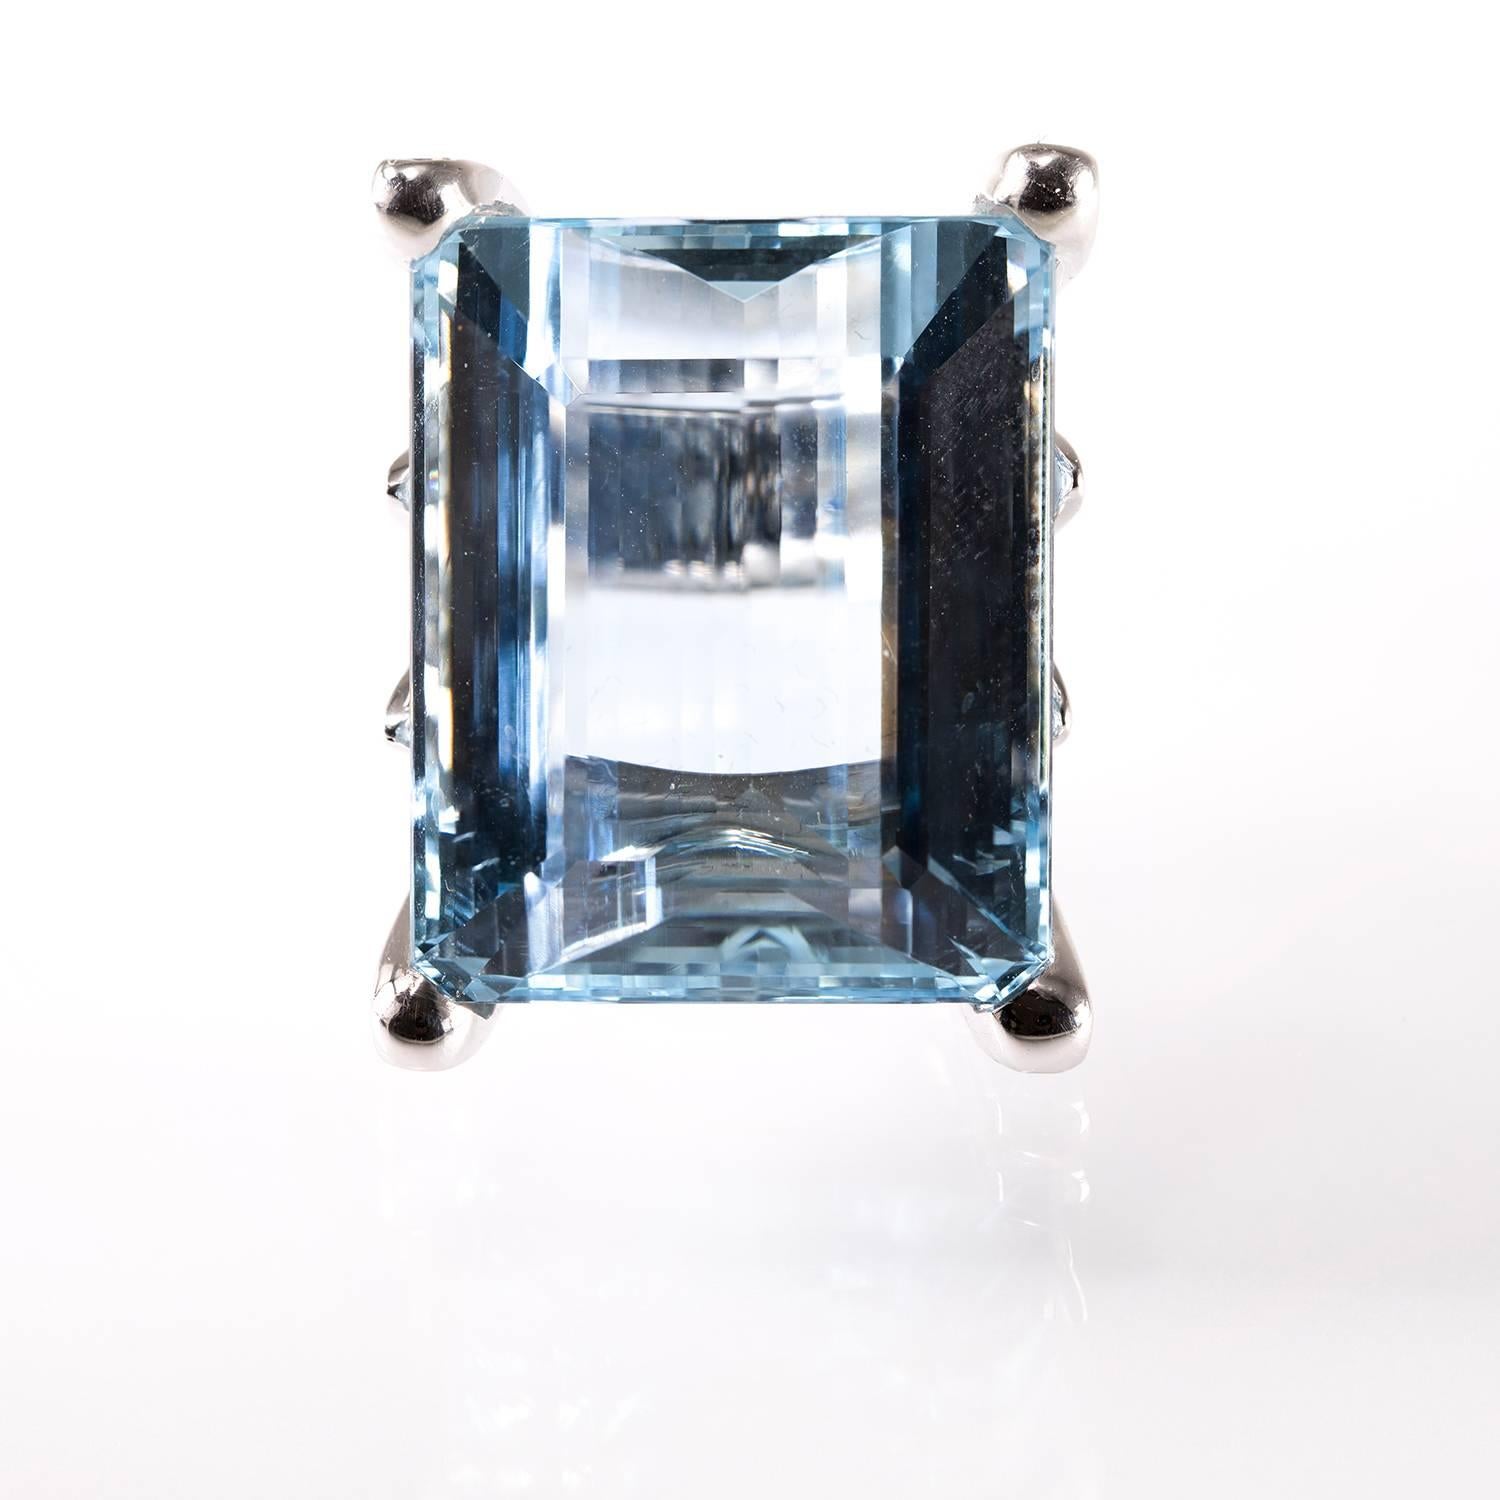 Exquisite One of a Kind 18kt white gold Ring center set with an emerald cut Aquamarine 47ct, transparent, bright intensity, gorgeous sky blue color, excellent cut and polish, pure without any inclusions. The Aquamarine is set between 4 18kt white